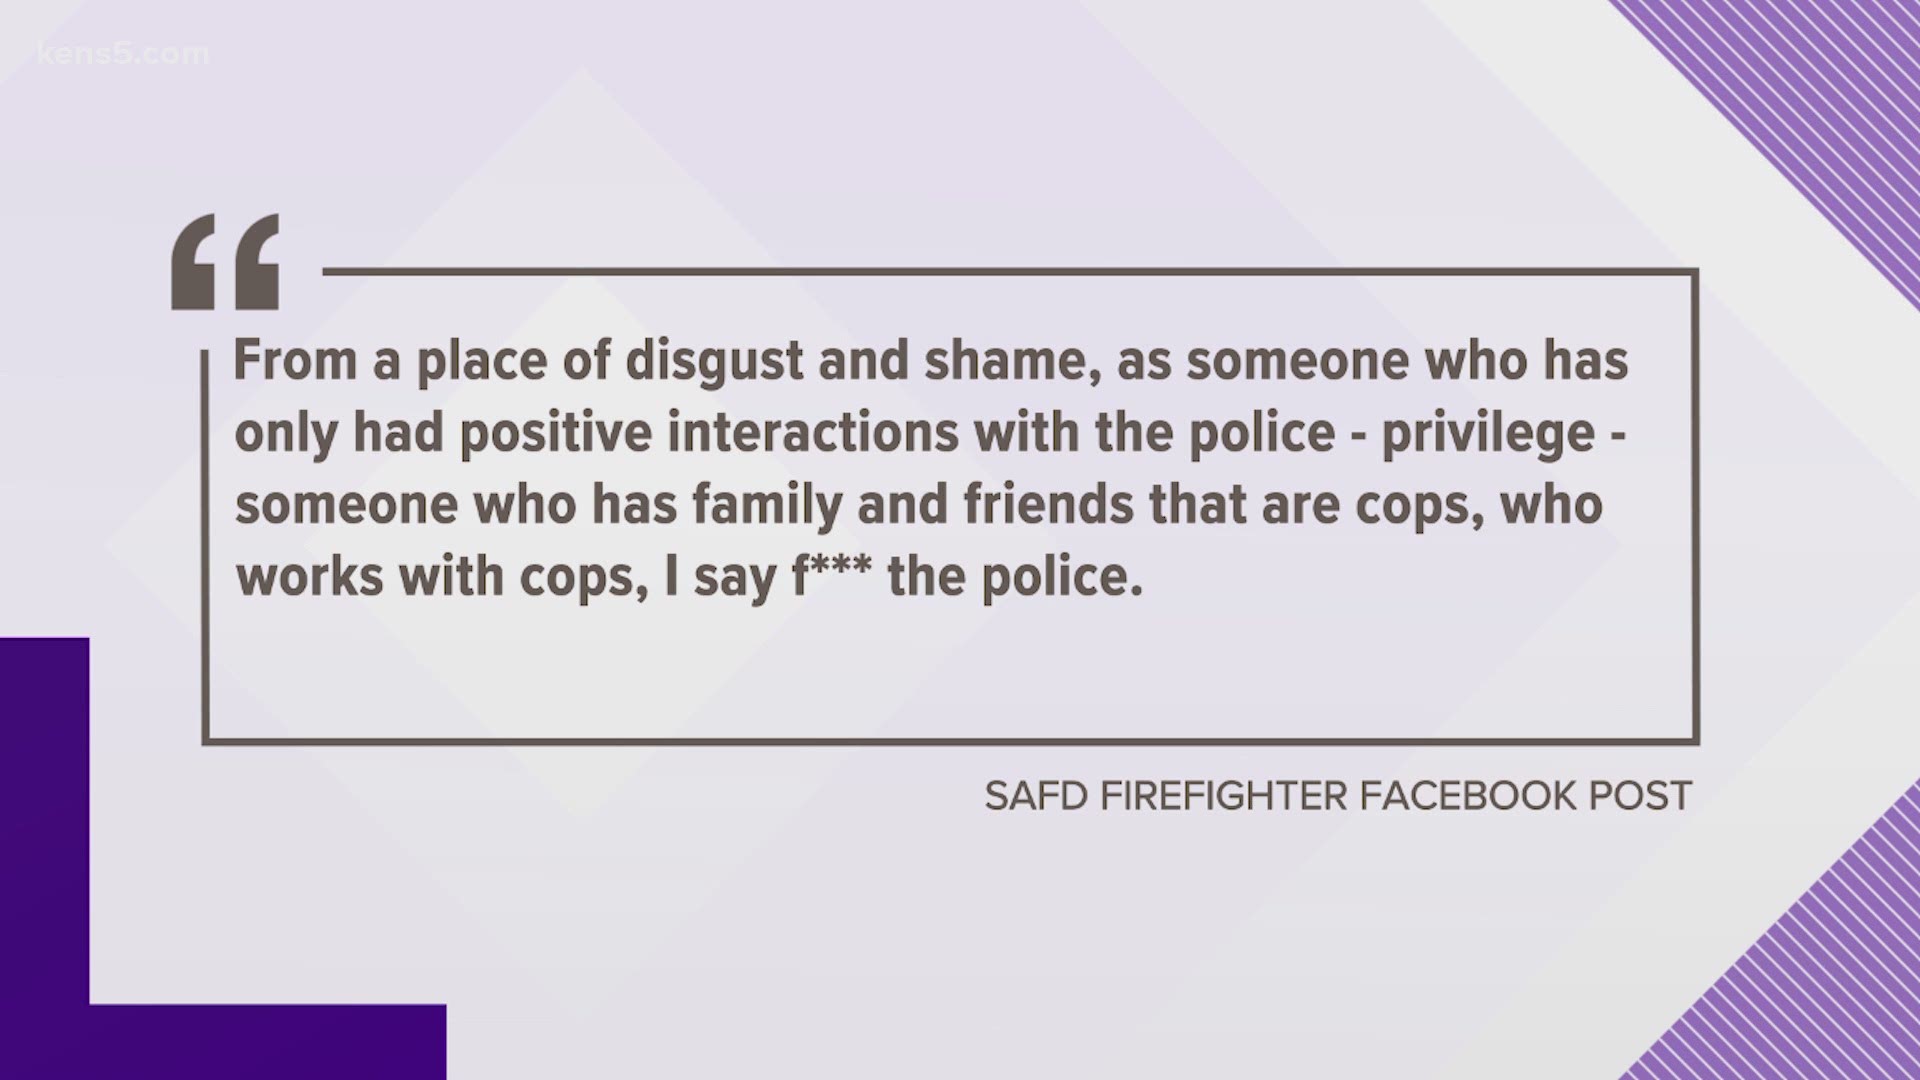 The San Antonio Fire Department says it's investigating the firefighter and his post, adding that the message doesn't reflect the department.